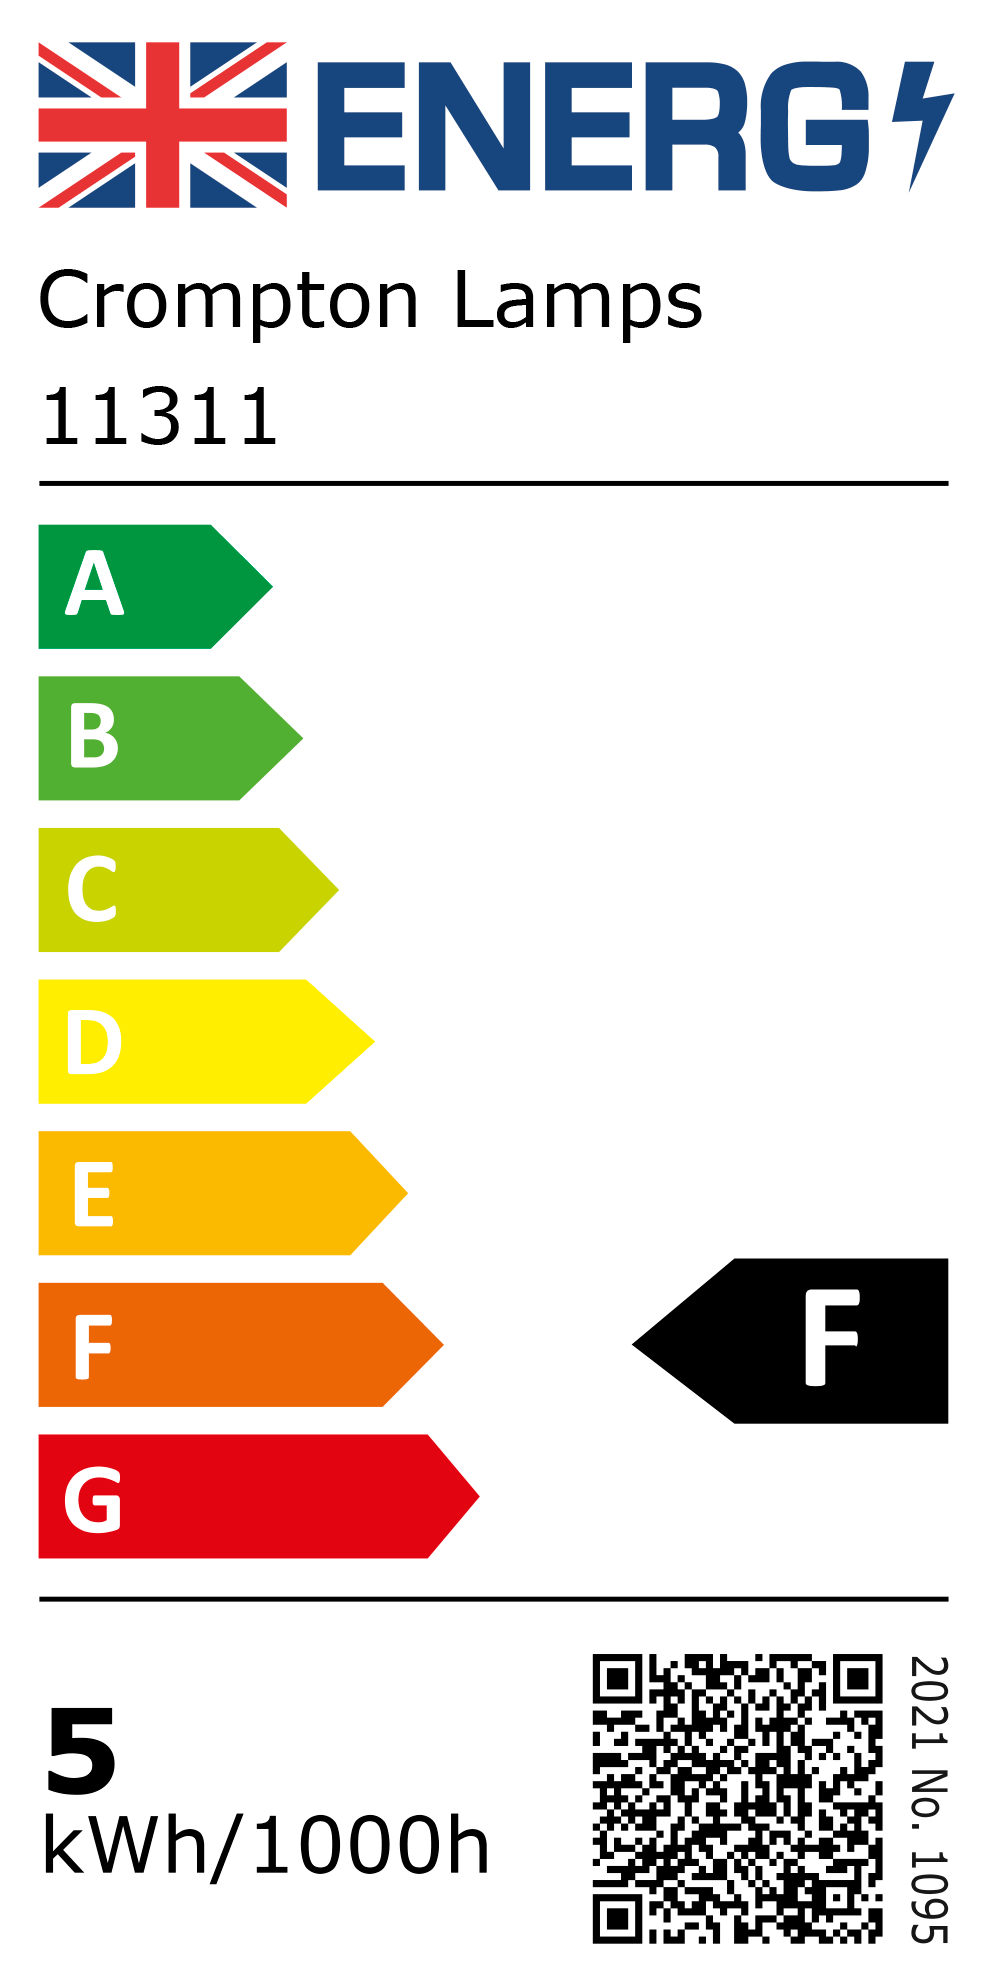 New 2021 Energy Rating Label: Stock Code 11311